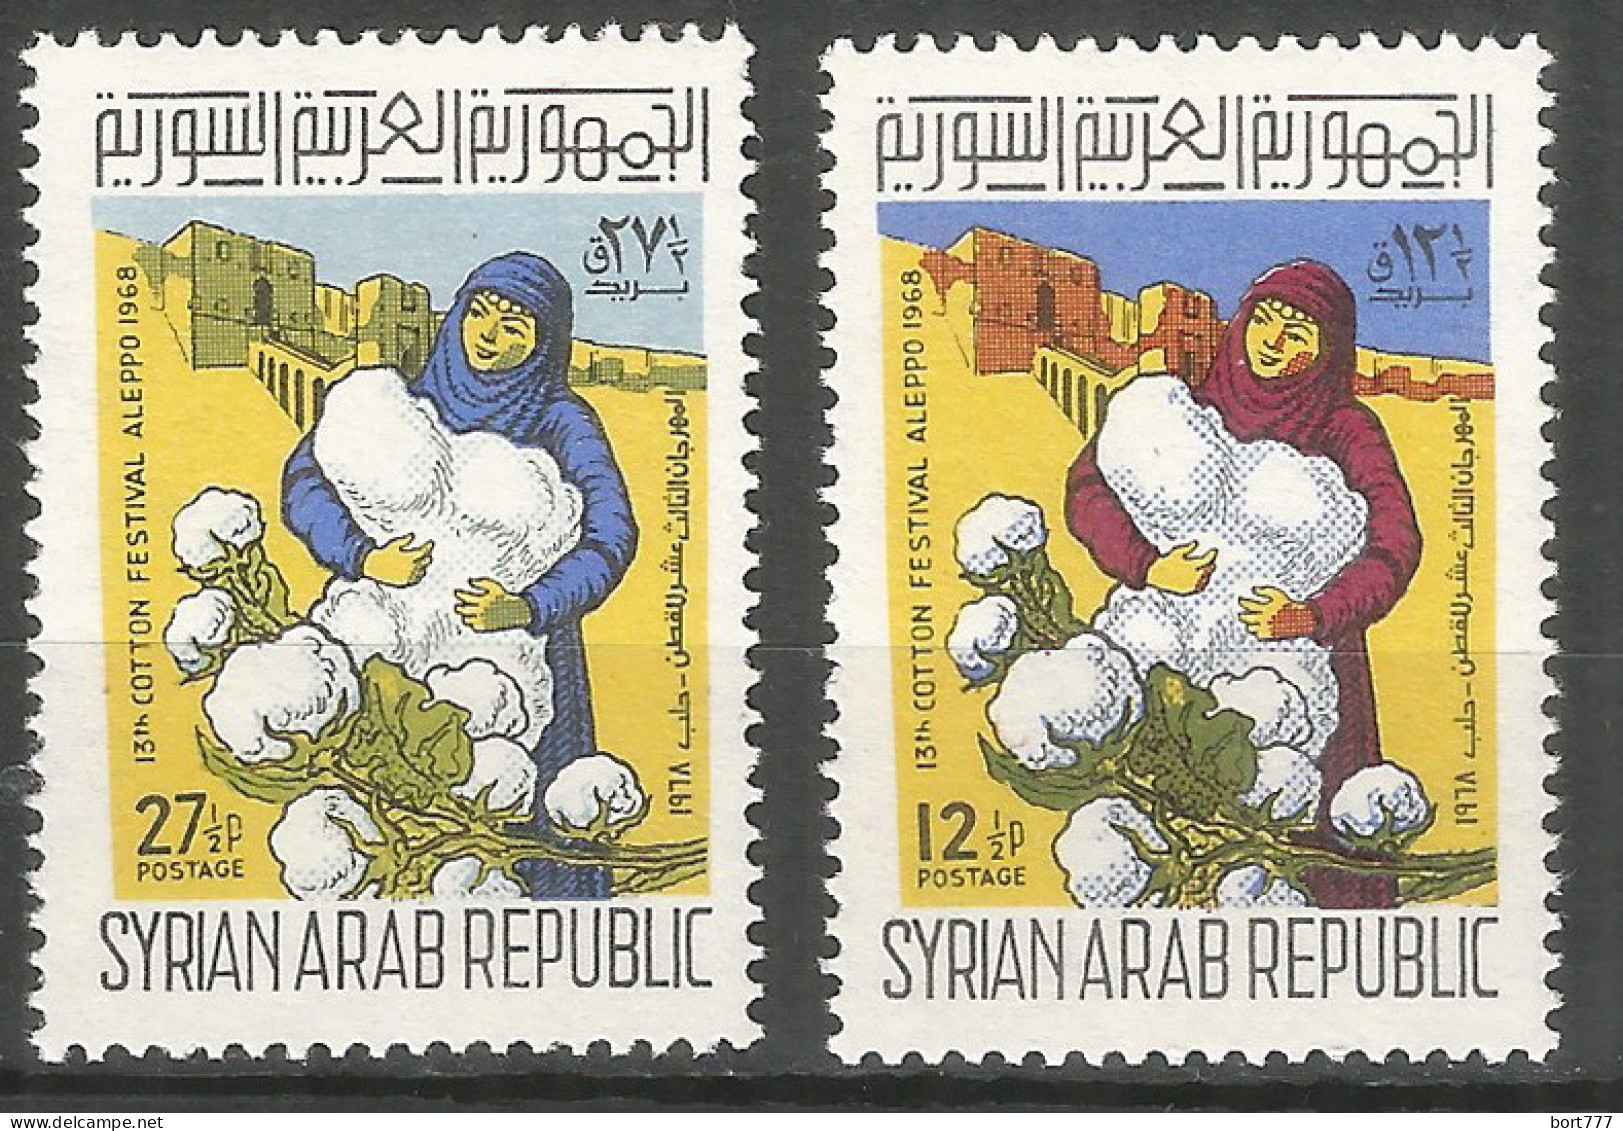 Syria 1968 Mint Stamps MNH(**)  - Syrien